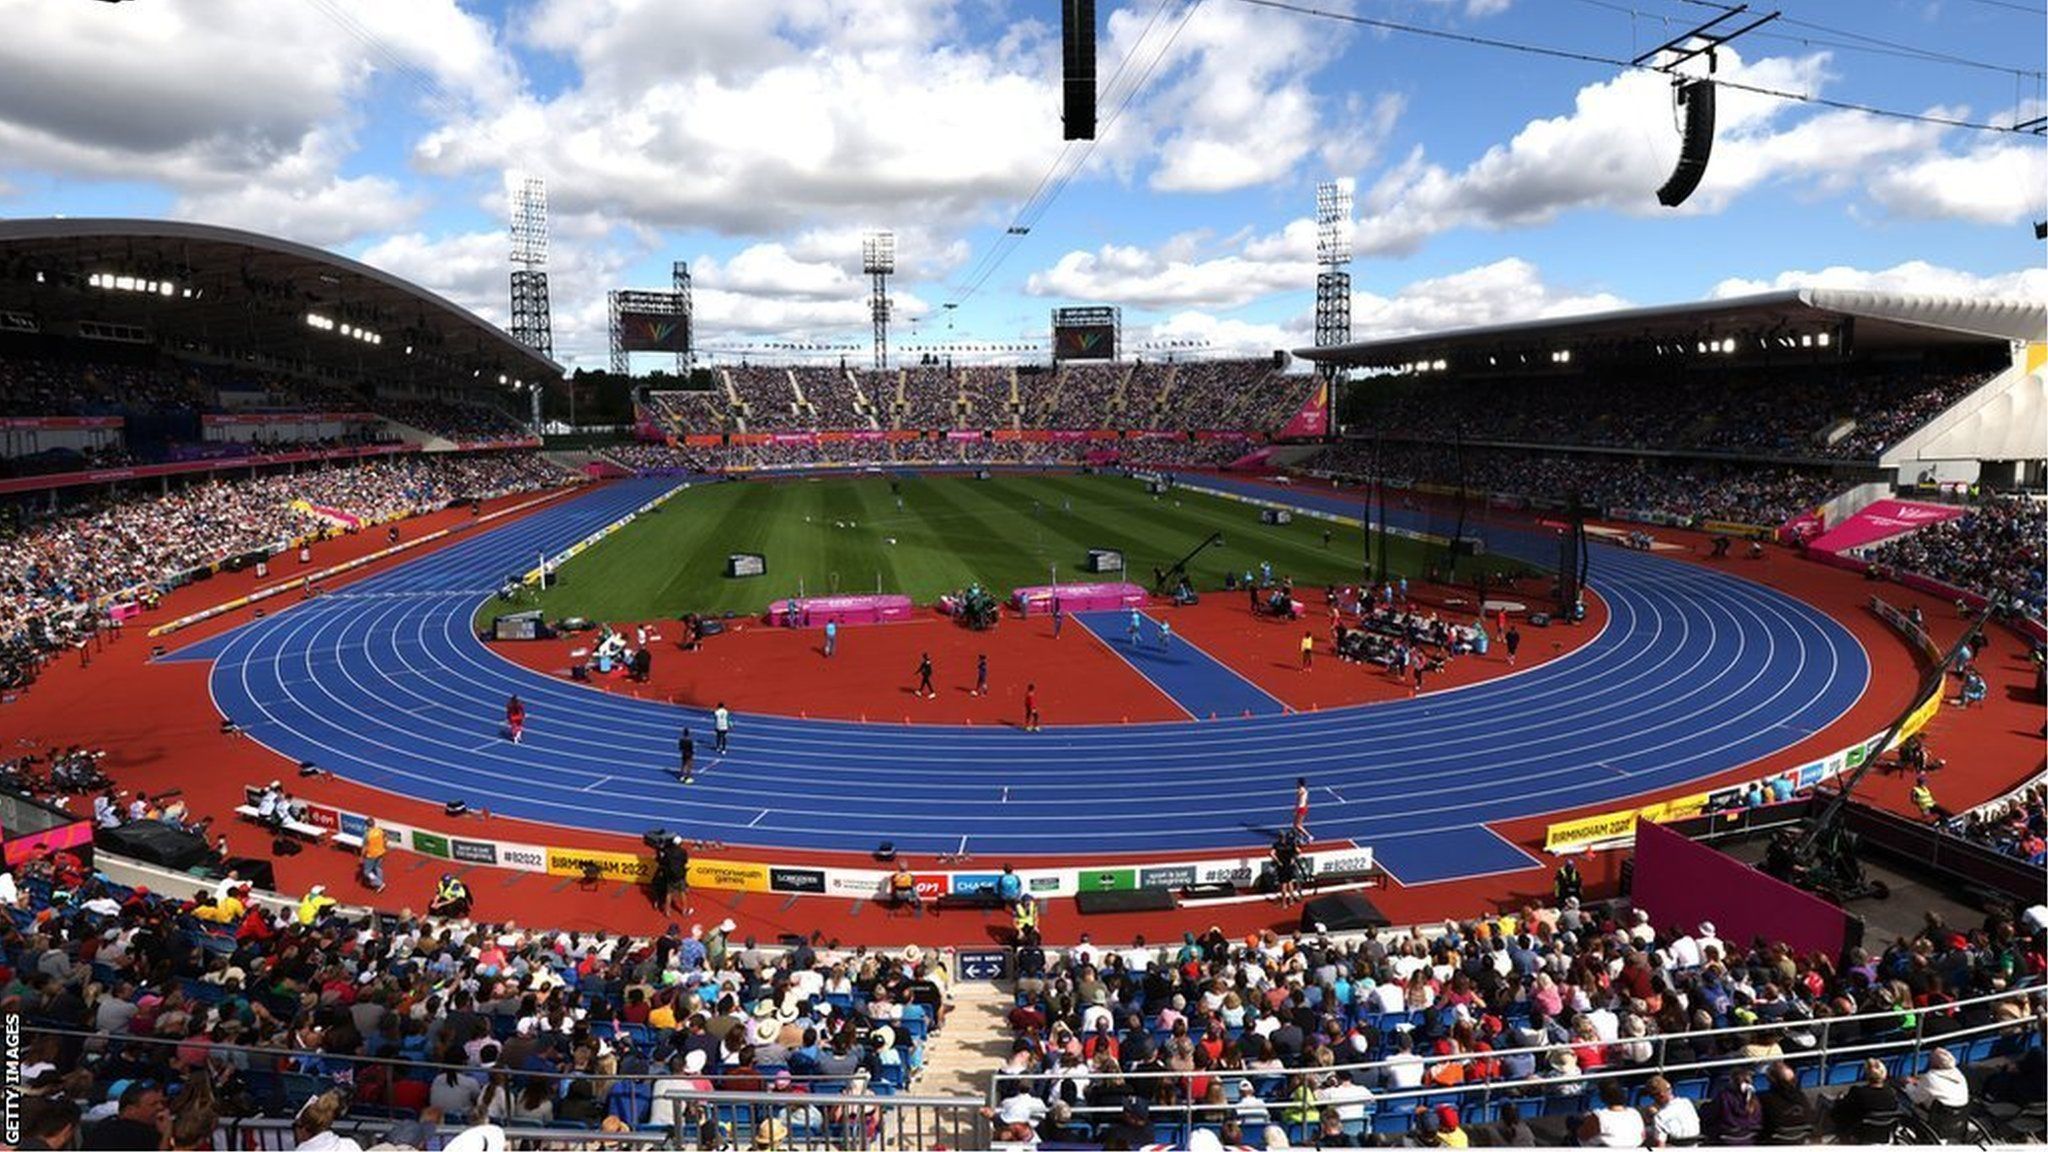 General view of the Alexander Stadium in Birmingham during the 2022 Commonwealth Games